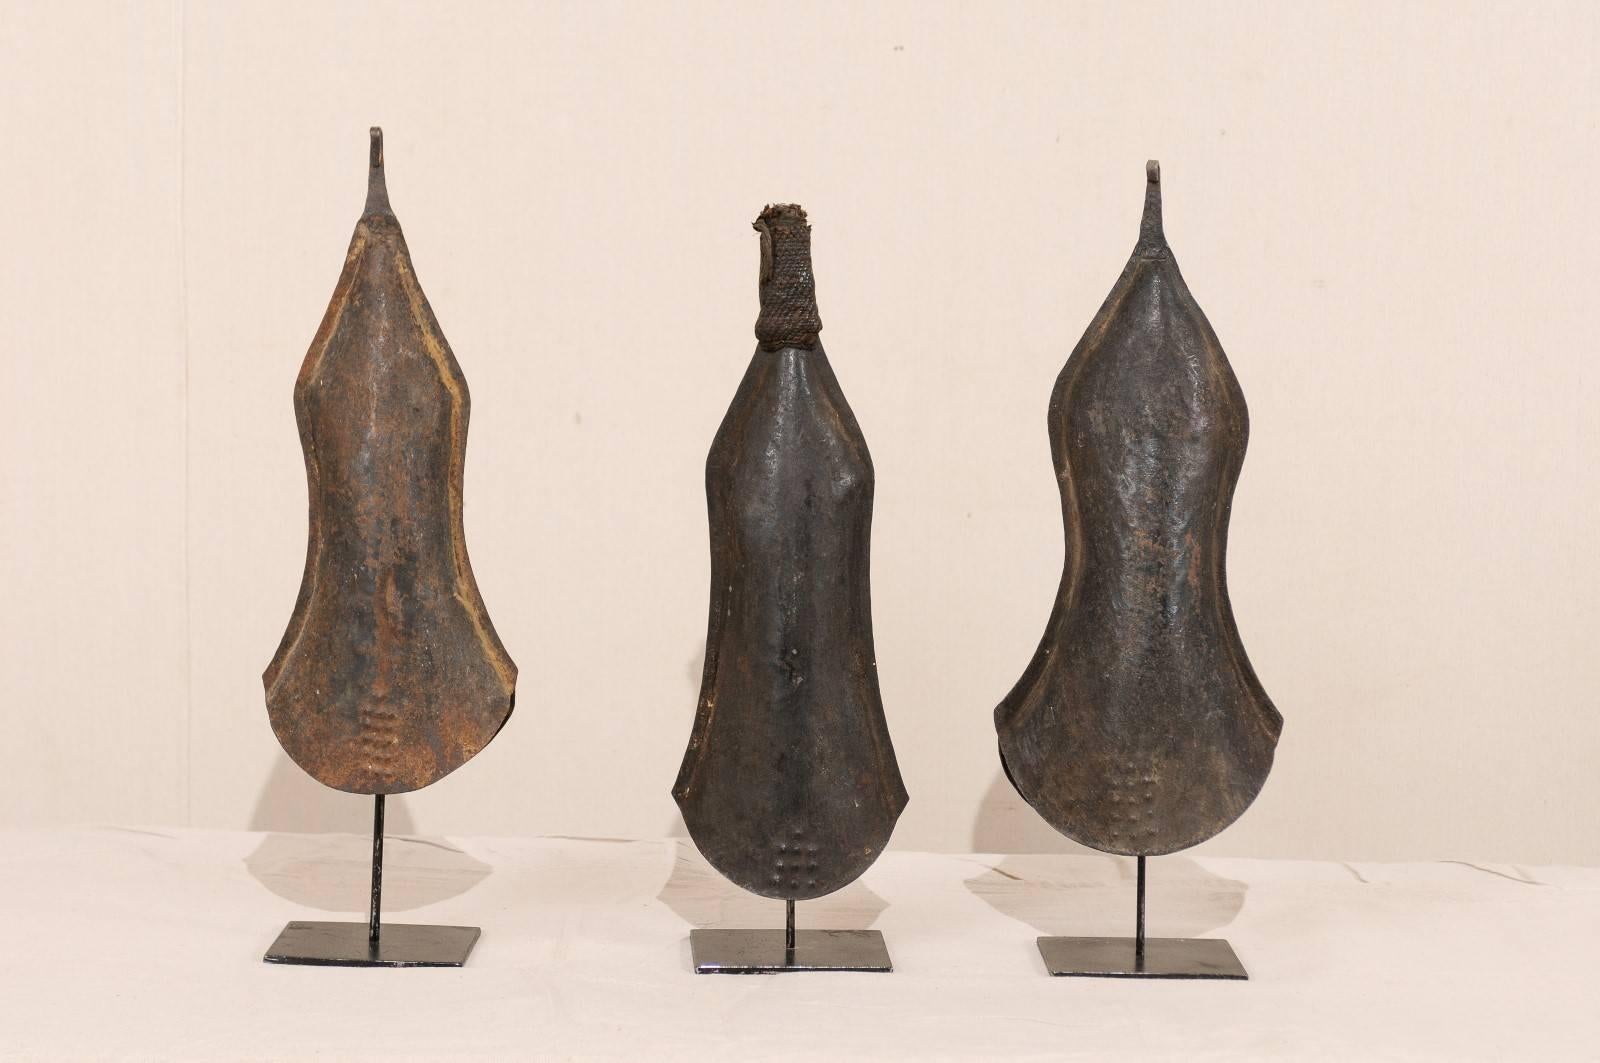 A collection of African hand-forged iron bell currency on custom stands from the 20th century. This is a collection of three African bell currencies of hand-forged iron on custom black iron stands. These bells were made by the tribal blacksmiths of